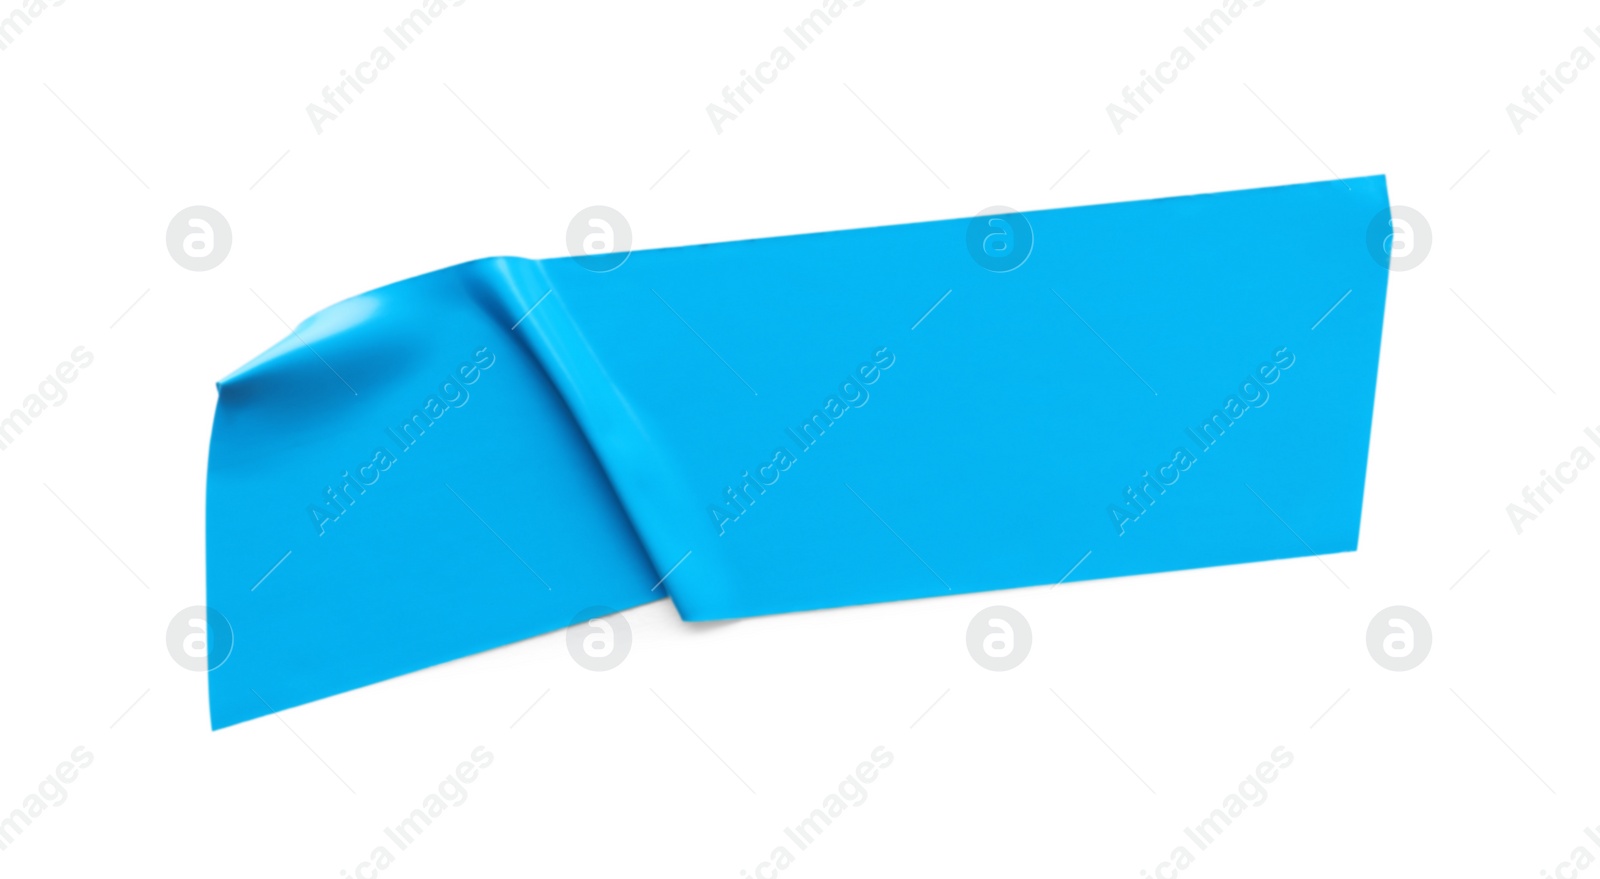 Photo of Piece of light blue insulating tape isolated on white, top view